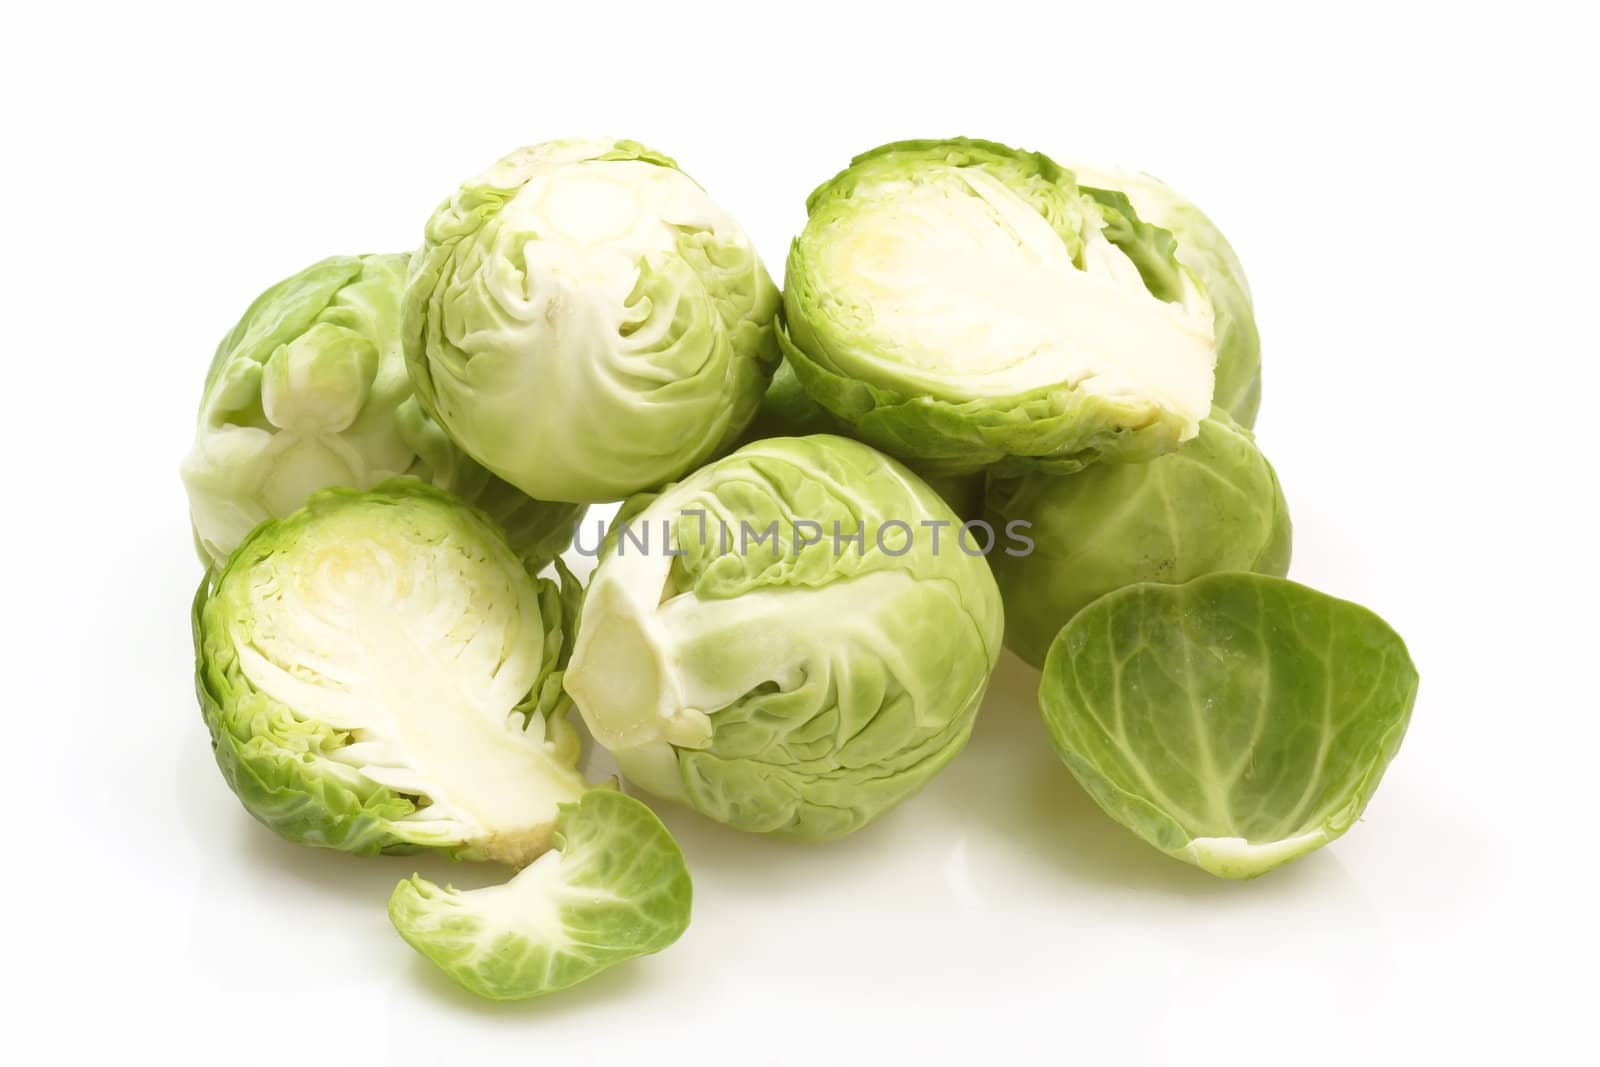 Brussels Sprouts by Teamarbeit